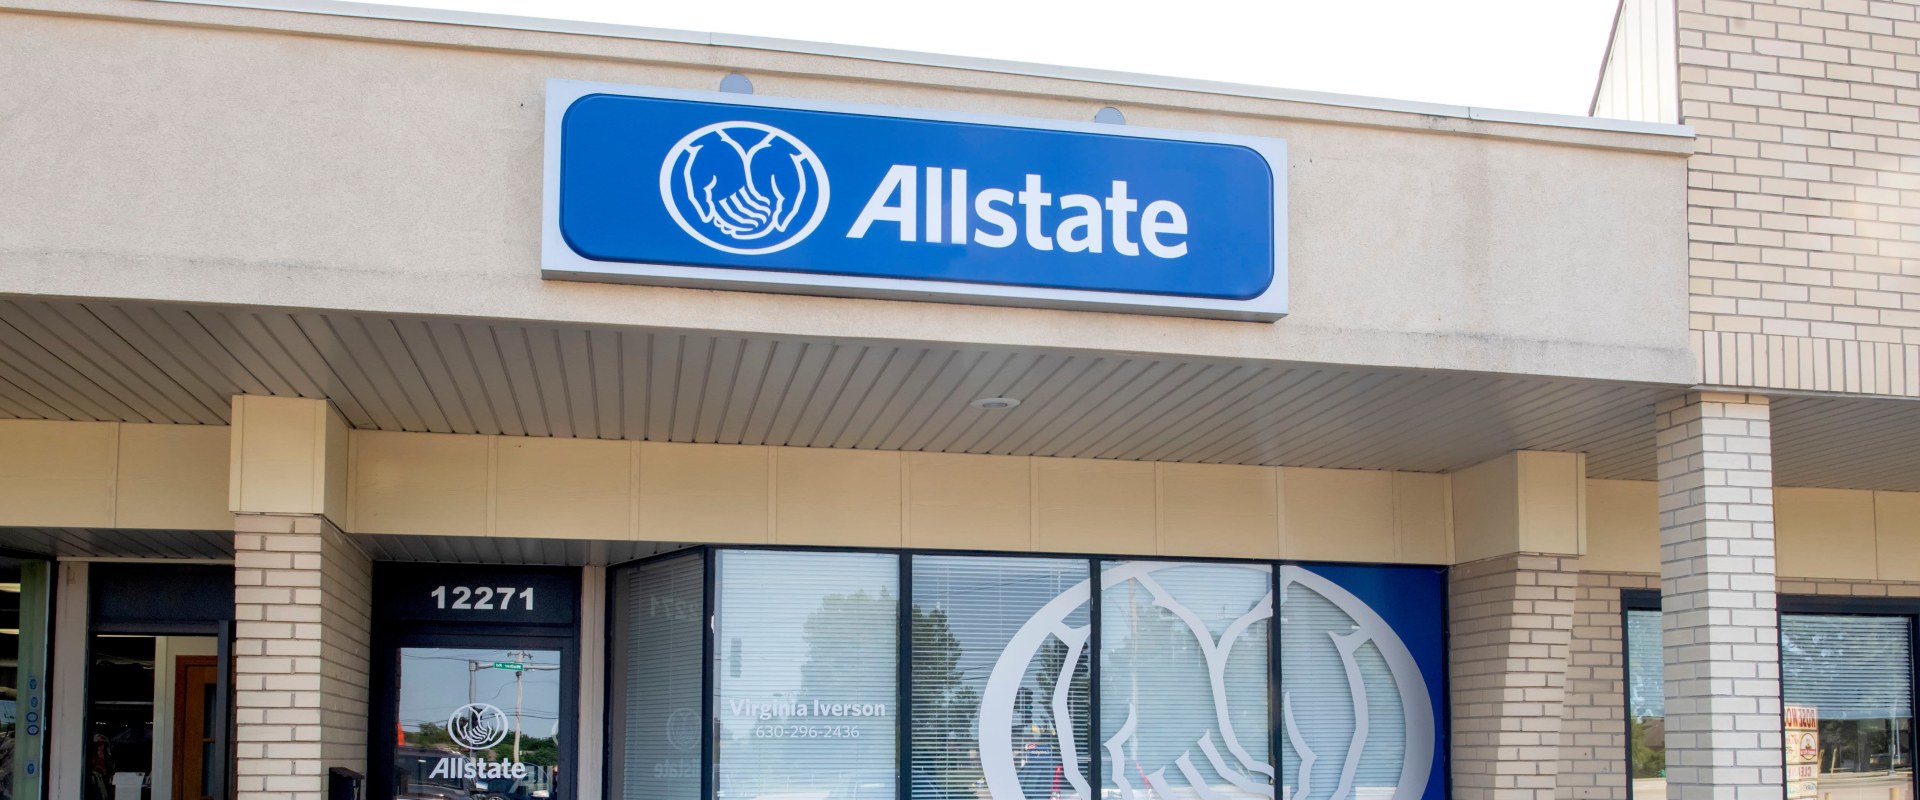 How Much Does Motorcycle Insurance Cost With Allstate?